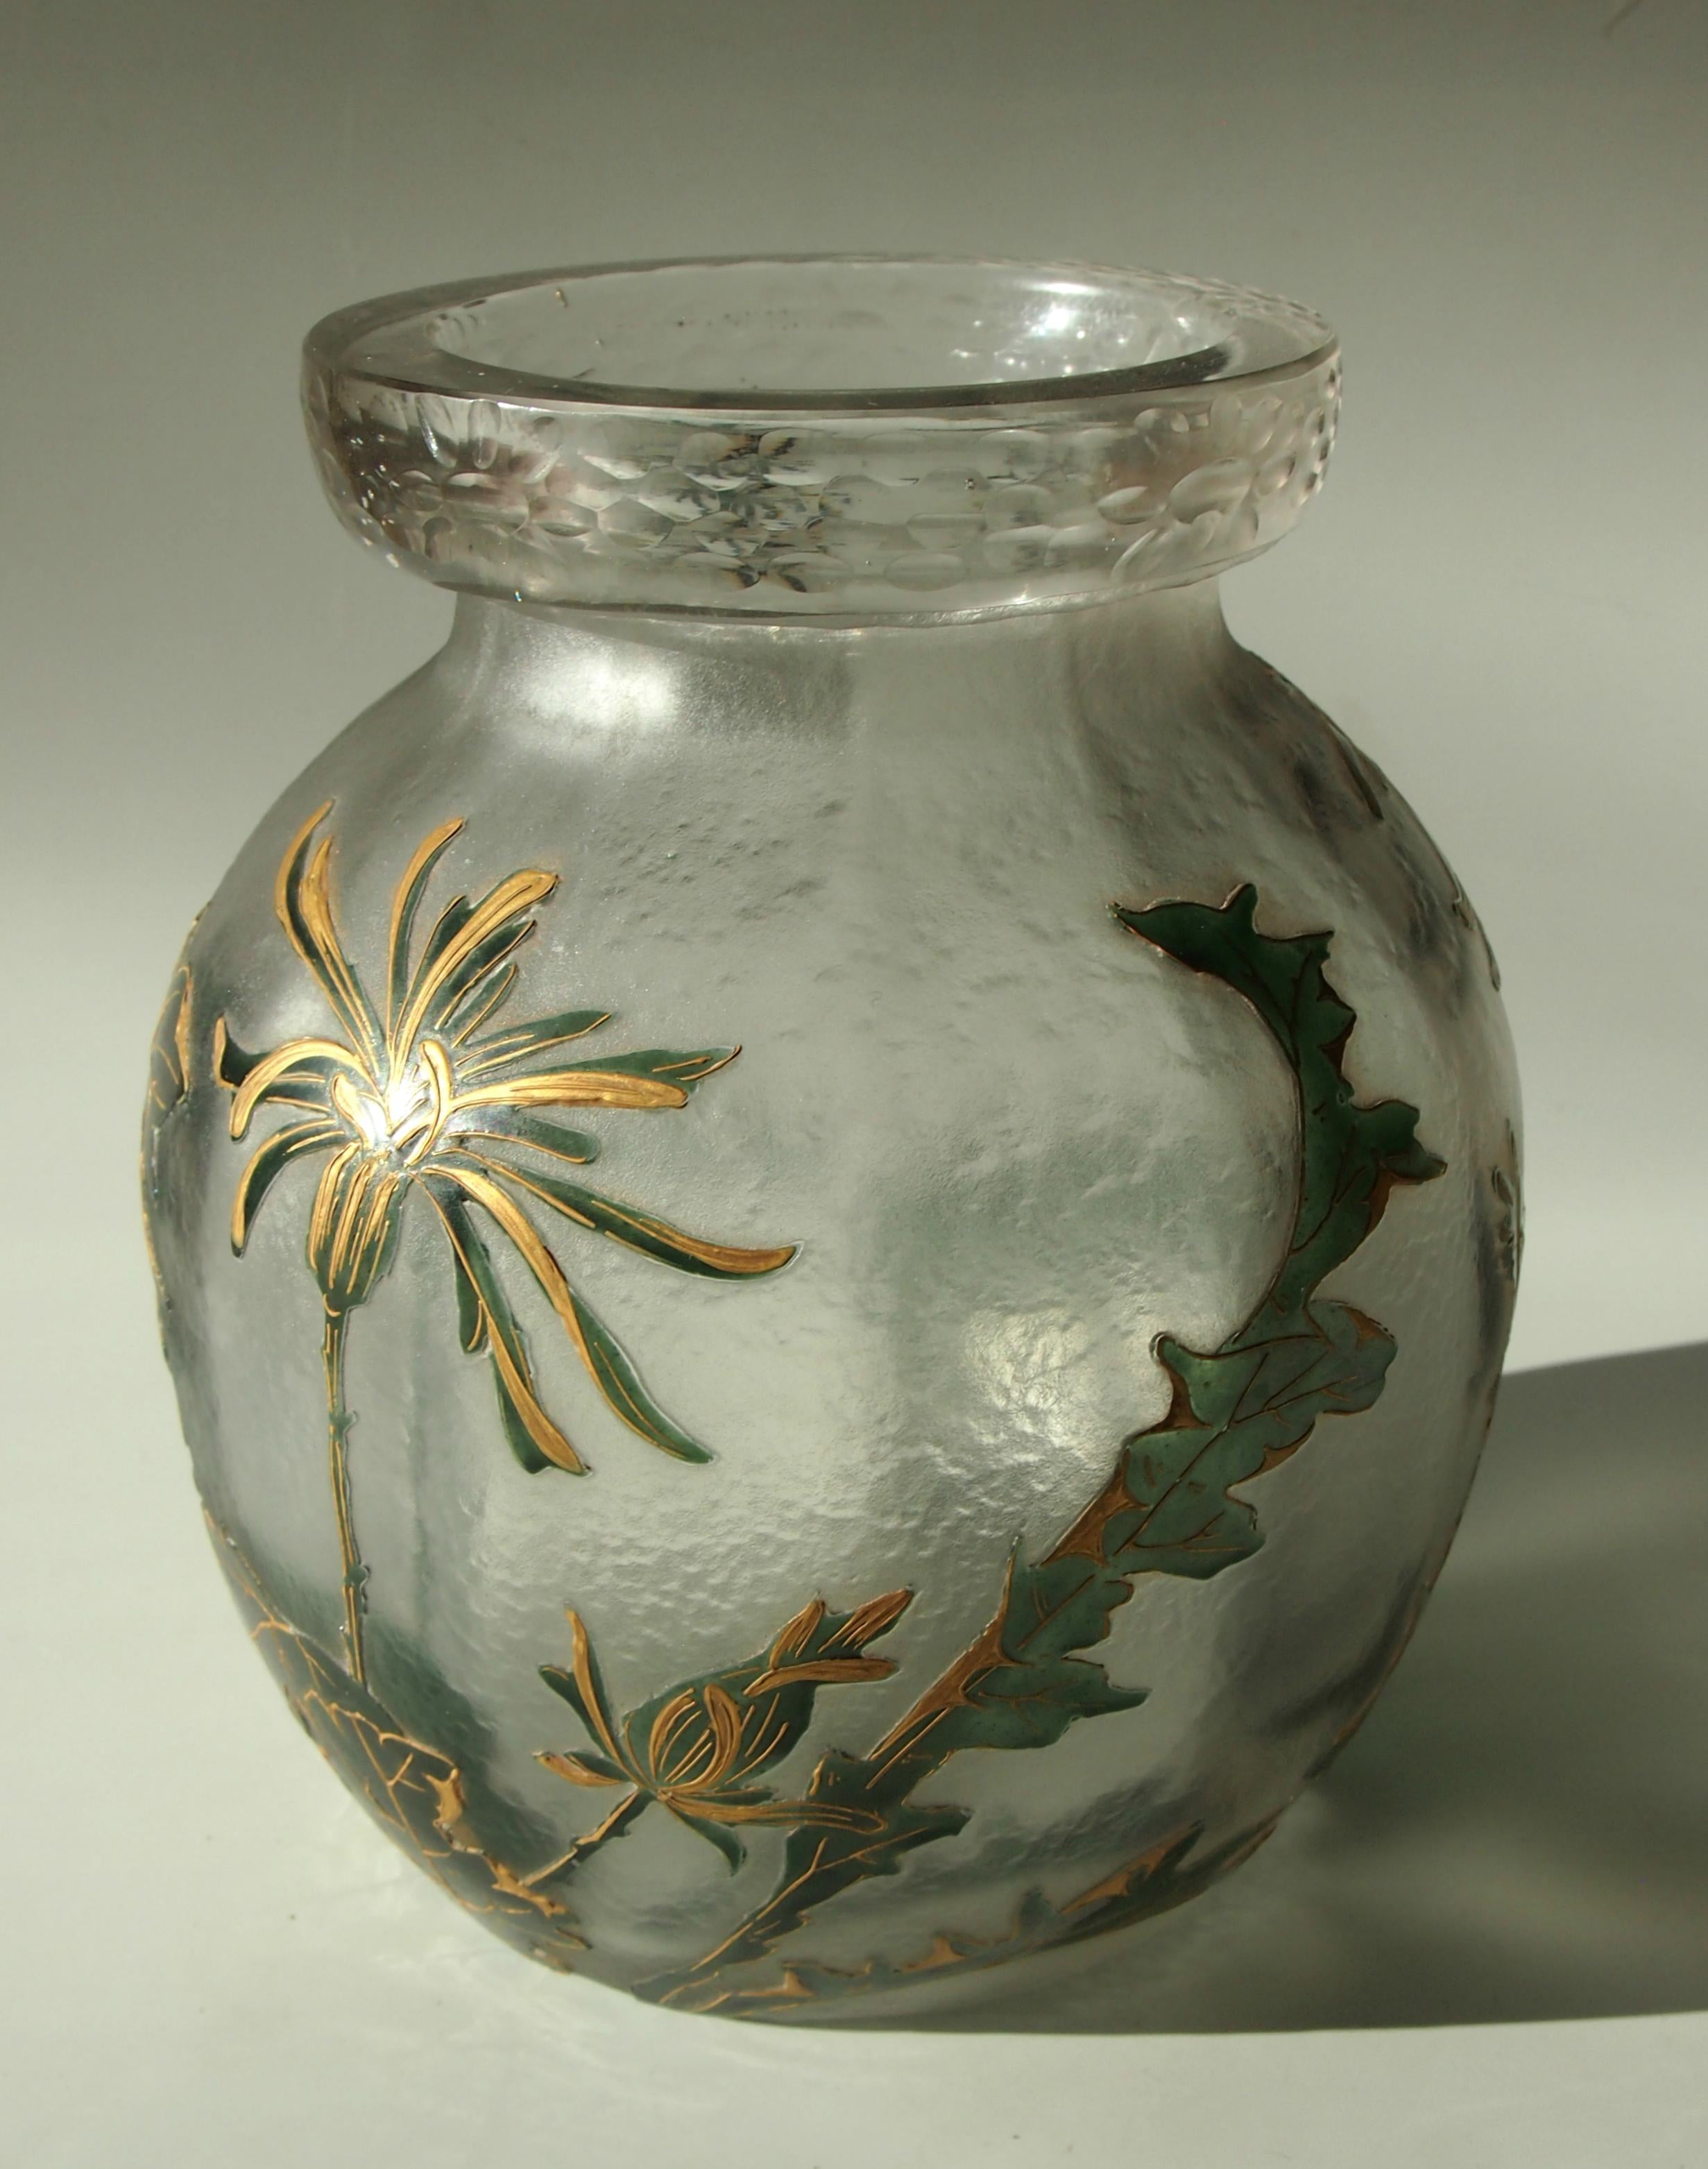 Stunning deeply acid cut back gilded and enamel early Art Nouveau Legras vase, decorated with stylised blooms and foliage in dark green and gold. It also has unusual Martele style work to the top collar (see image 7).

Legras at the time were the